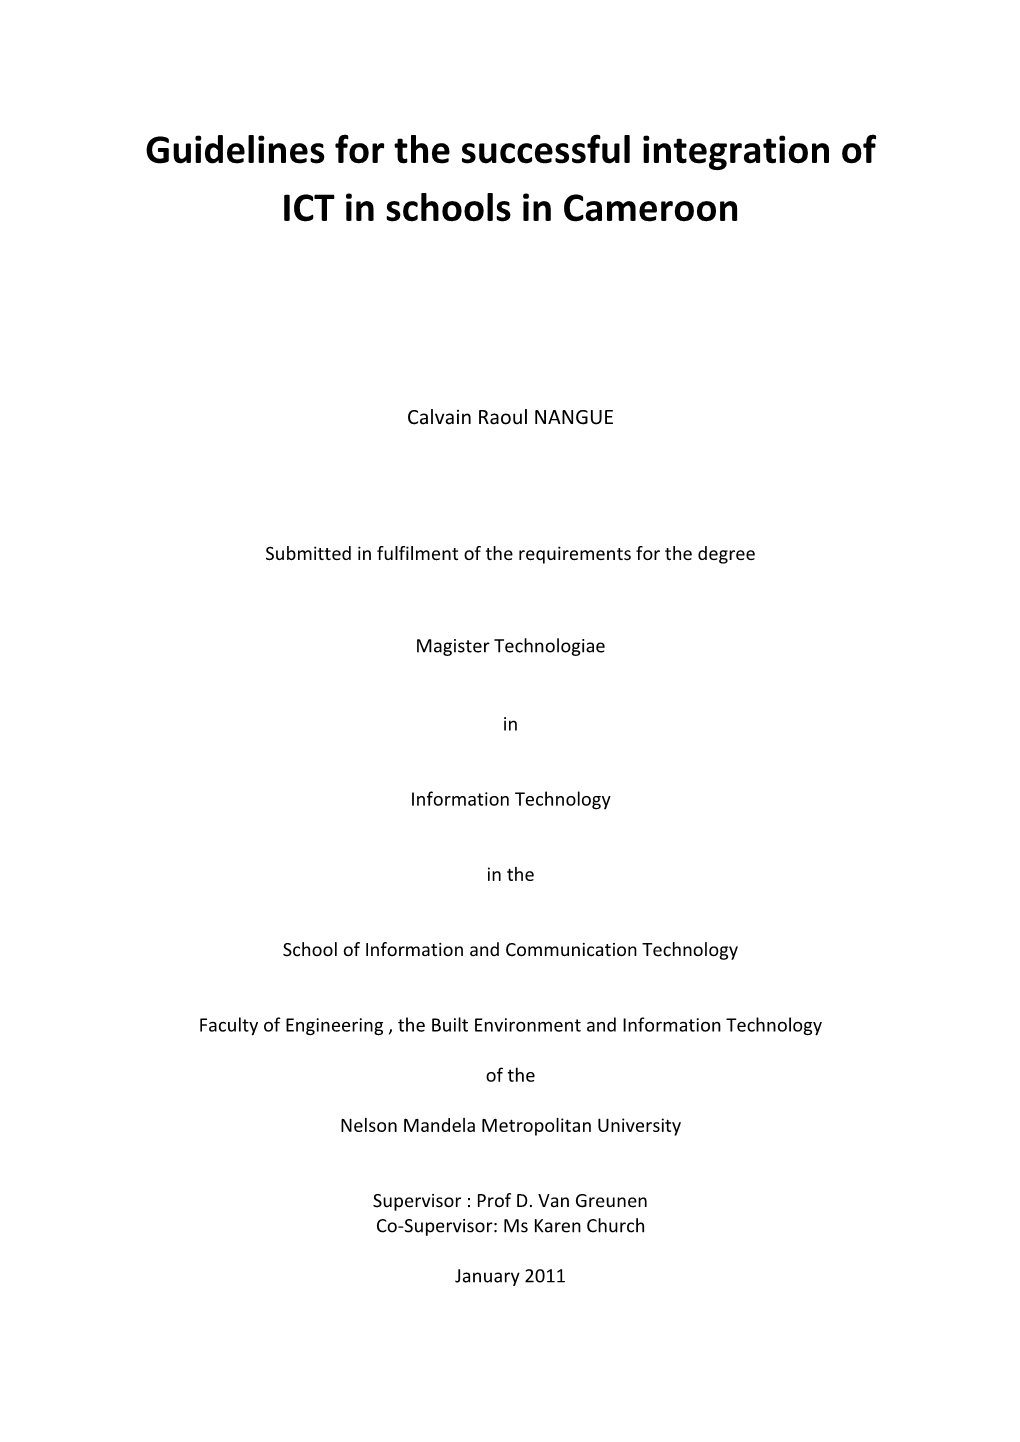 Guidelines for the Successful Integration of ICT in Schools in Cameroon